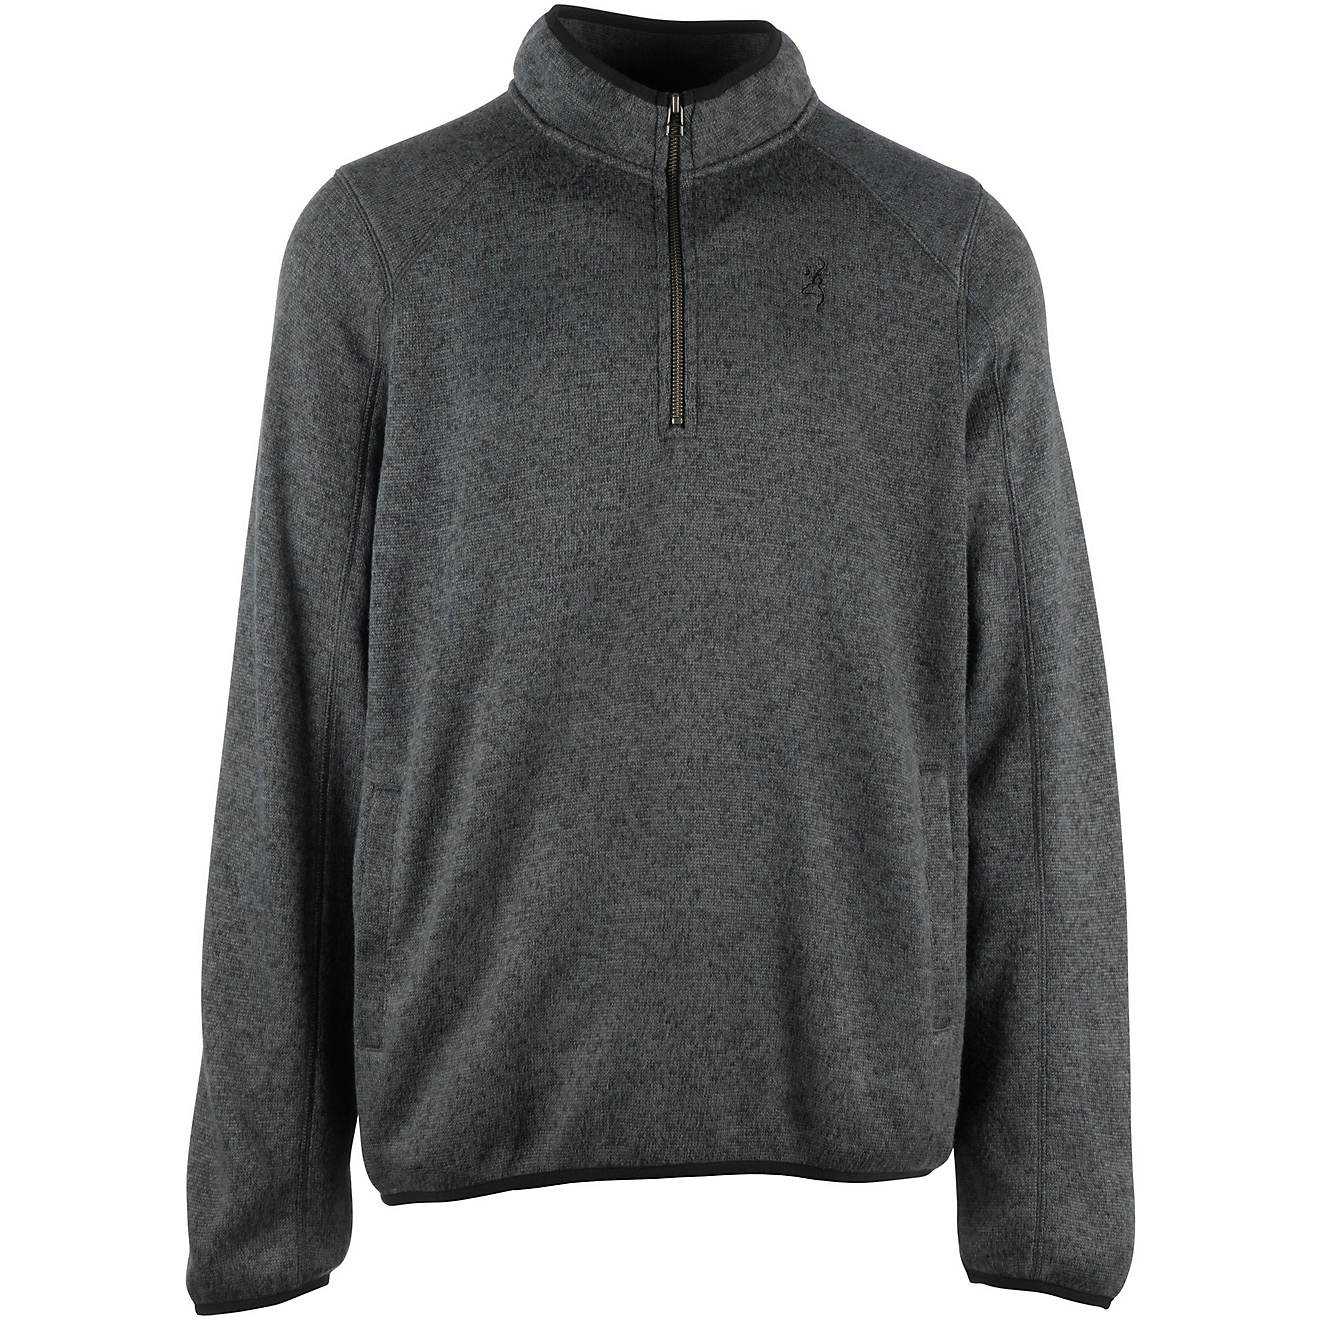 Browning Men's Jaxon Sweater | Free Shipping at Academy